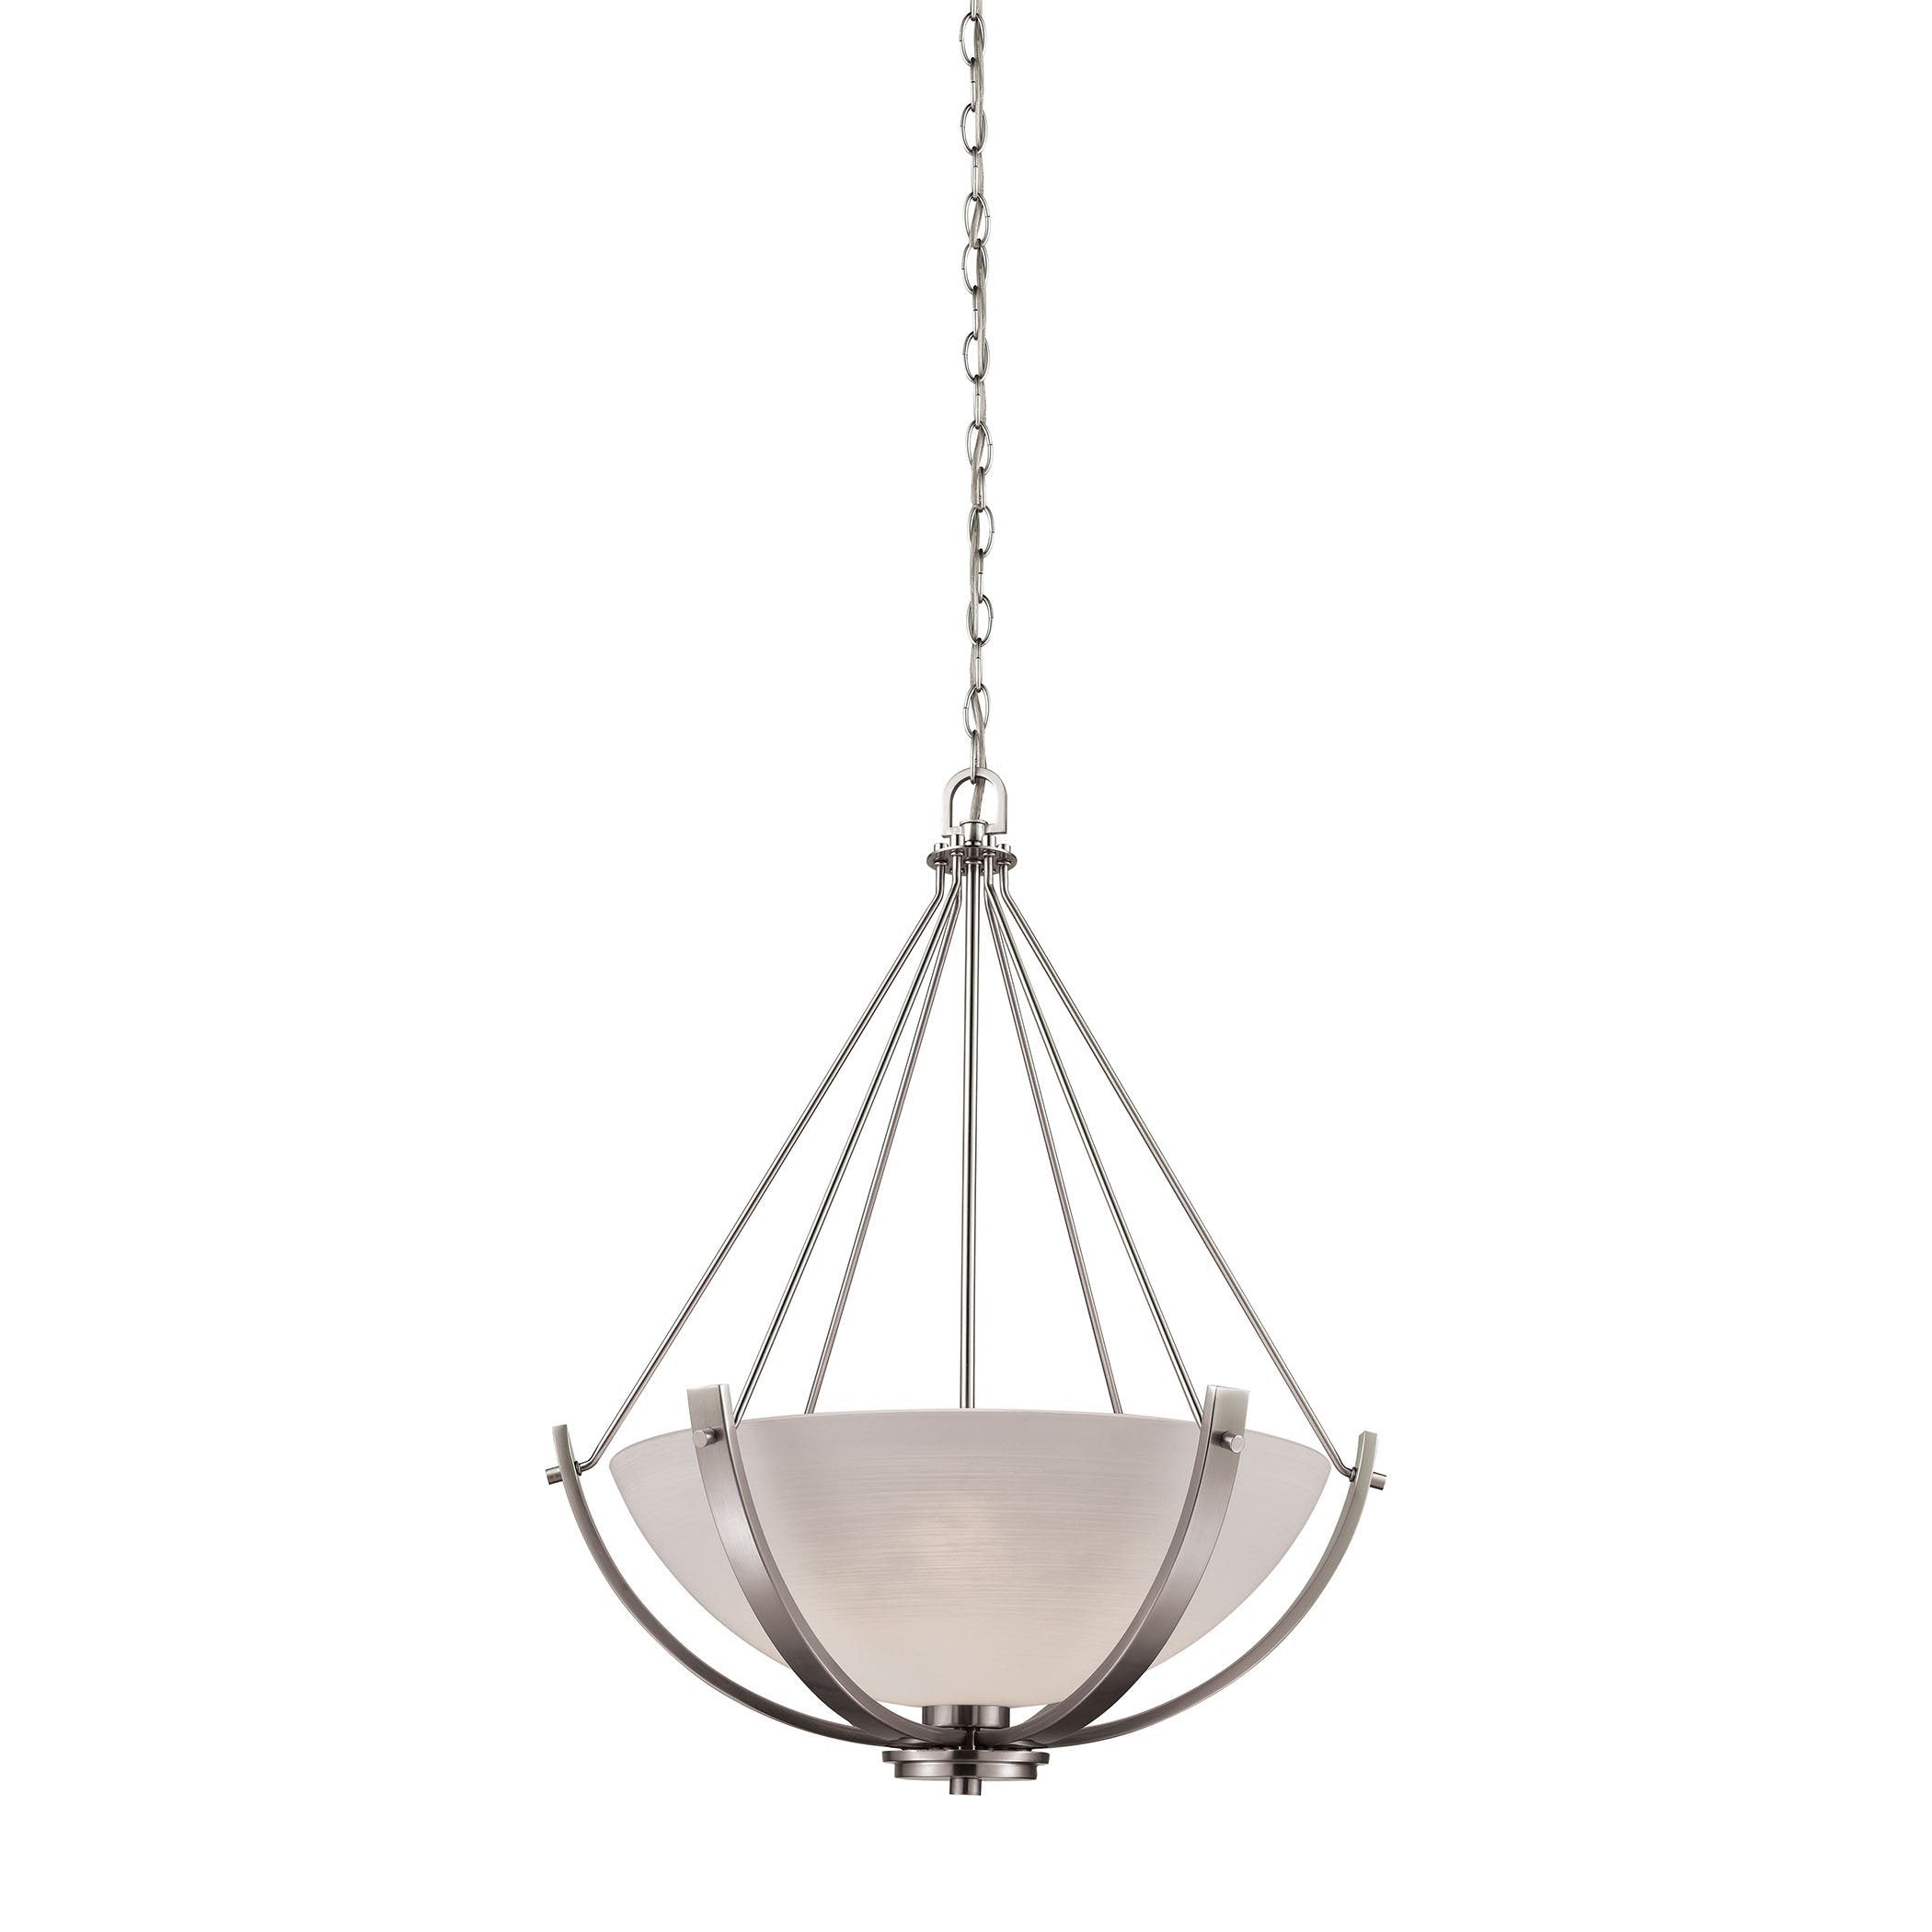 Casual Mission 3-Light Chandelier in in Brushed Nickel with White Lined Glass Ceiling Thomas Lighting 